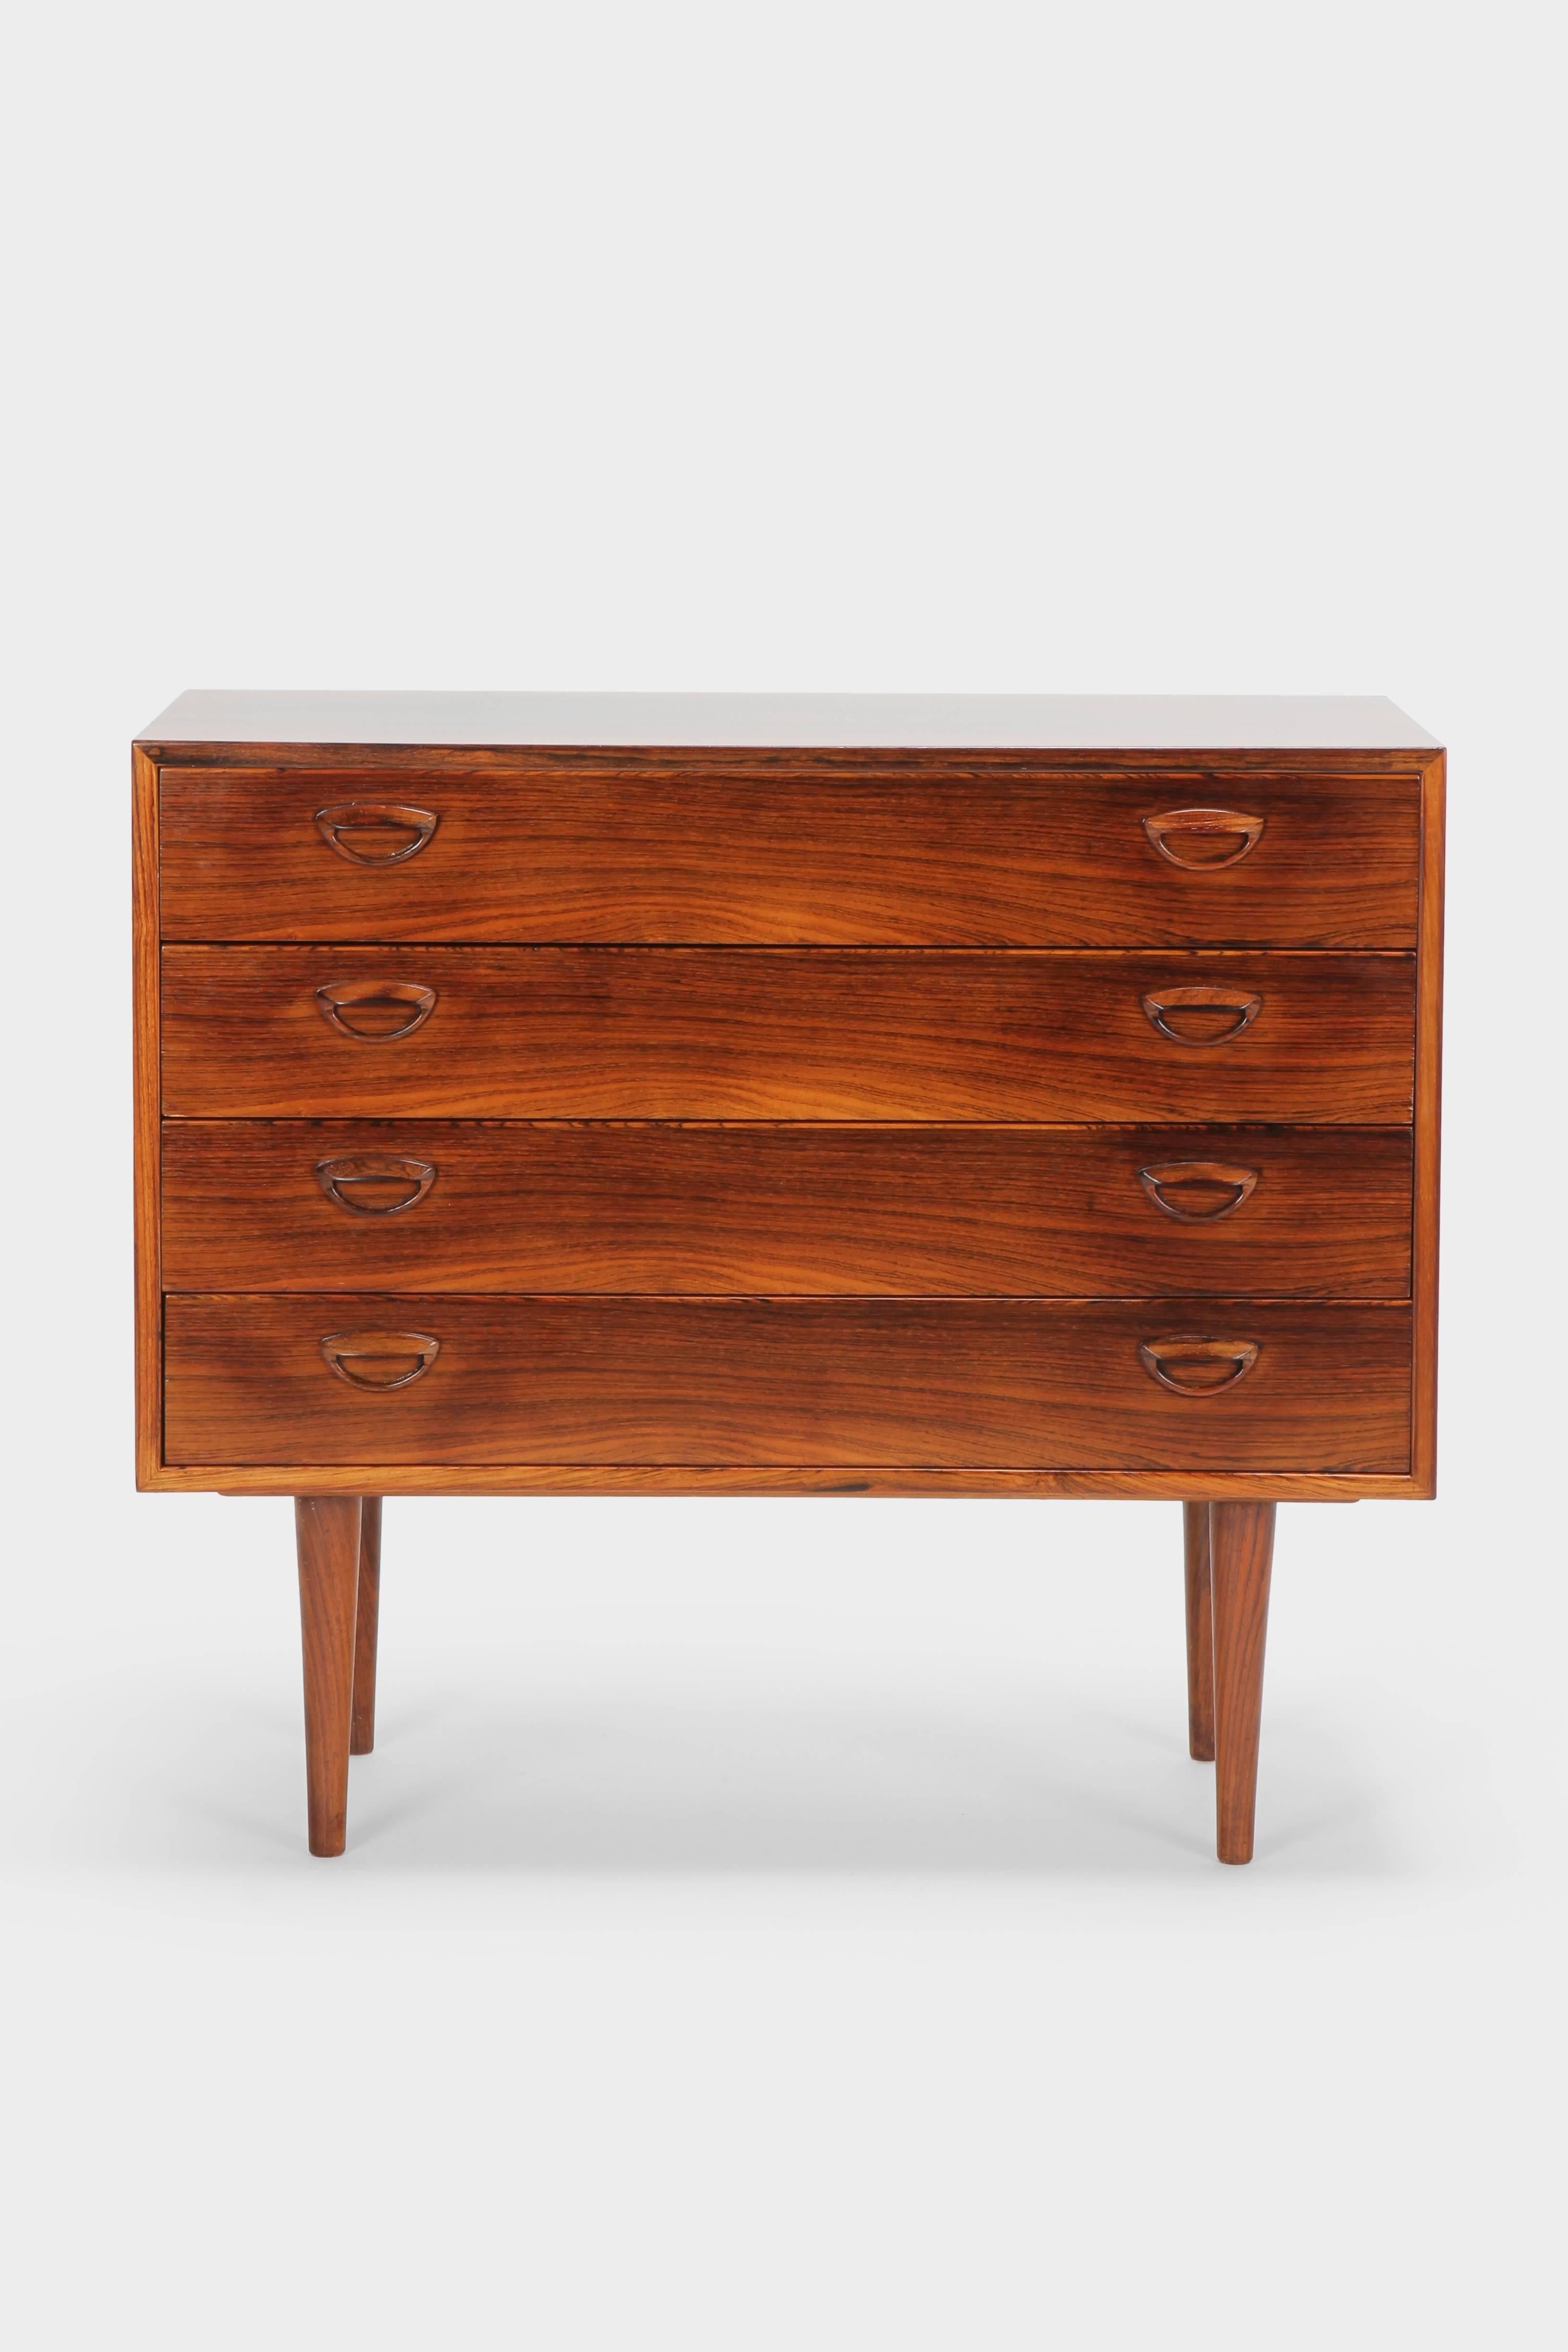 Kai Kristiansen sideboard manufactured by Feldballes Møbelfabrik in the 1960s in Denmark. Very elegant rosewood sideboard with four drawers and beautiful figured wooden grain details. Newly laquered with a nice patina.